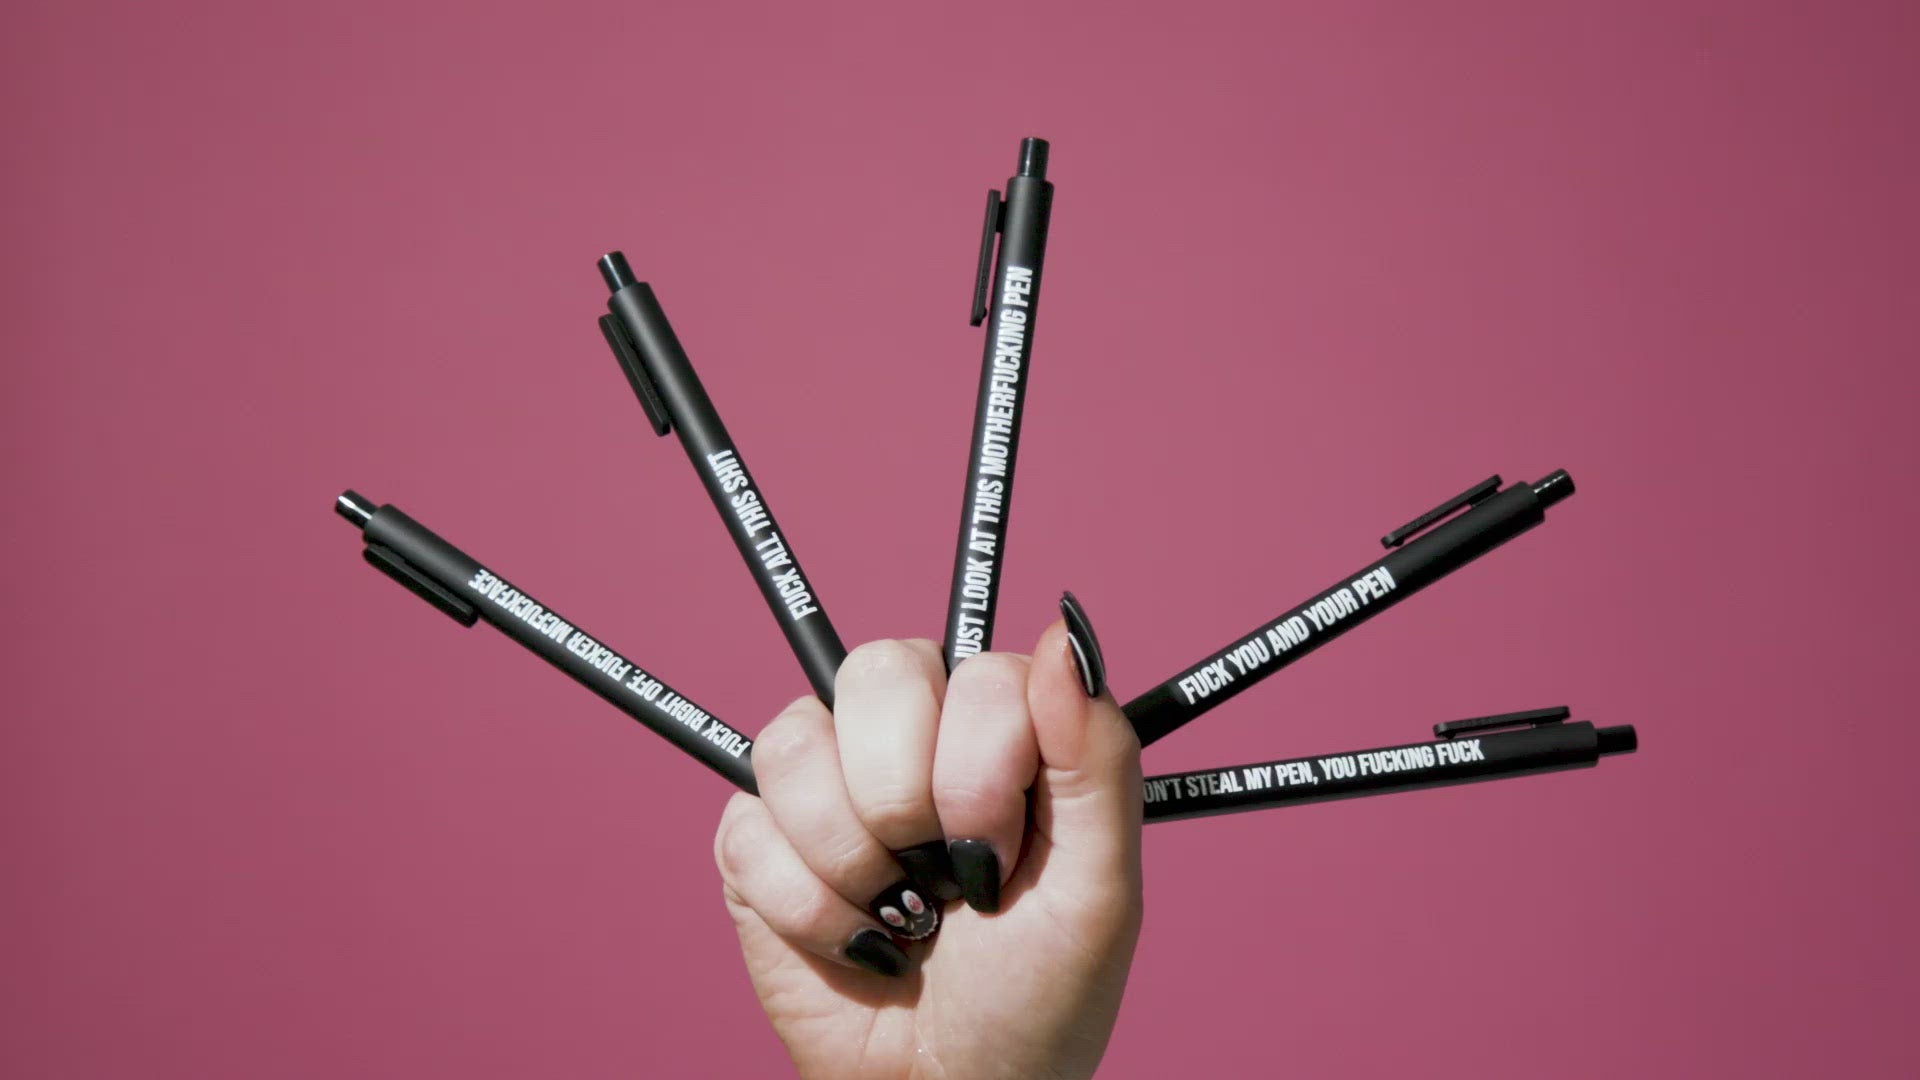 Sweary Fuck Pens Cussing Pen Gift Set - 5 Black Gel Pens Rife with